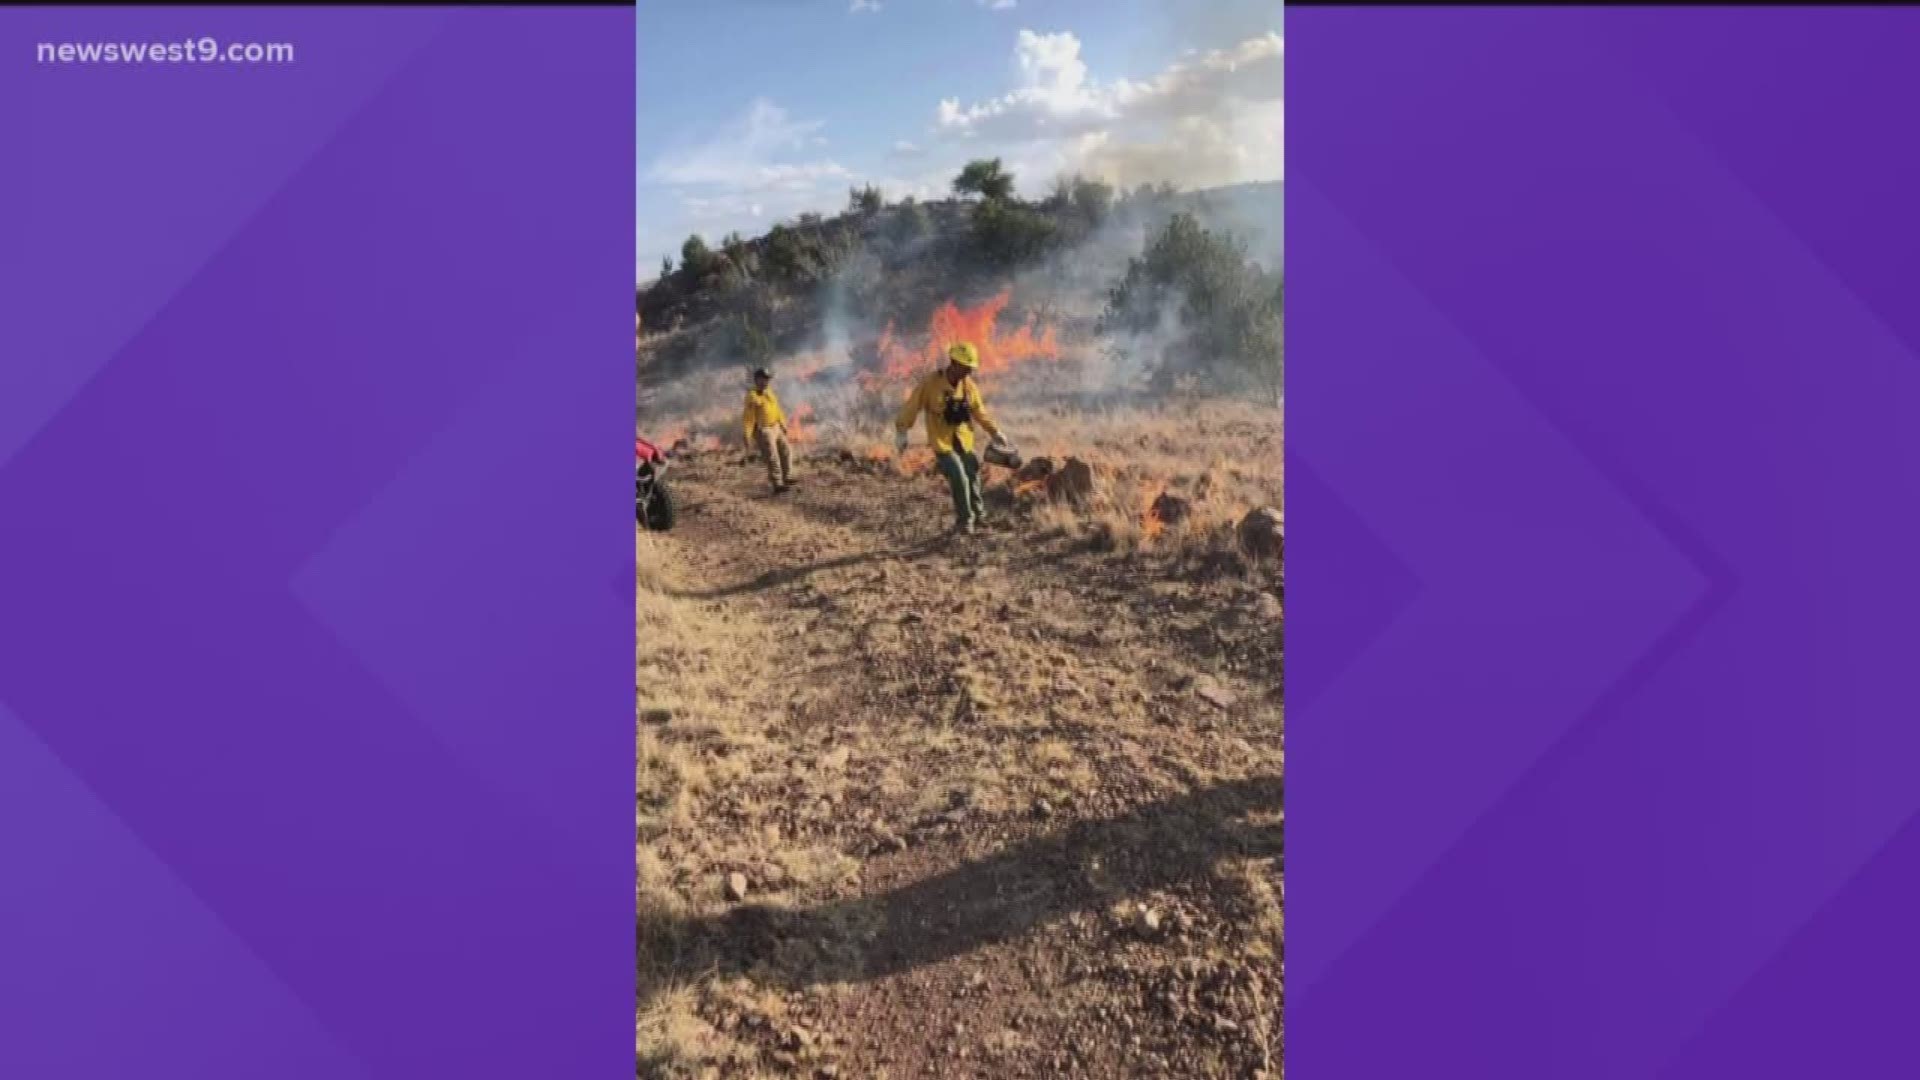 According to a recent Facebook post, the fire is around 90% contained.